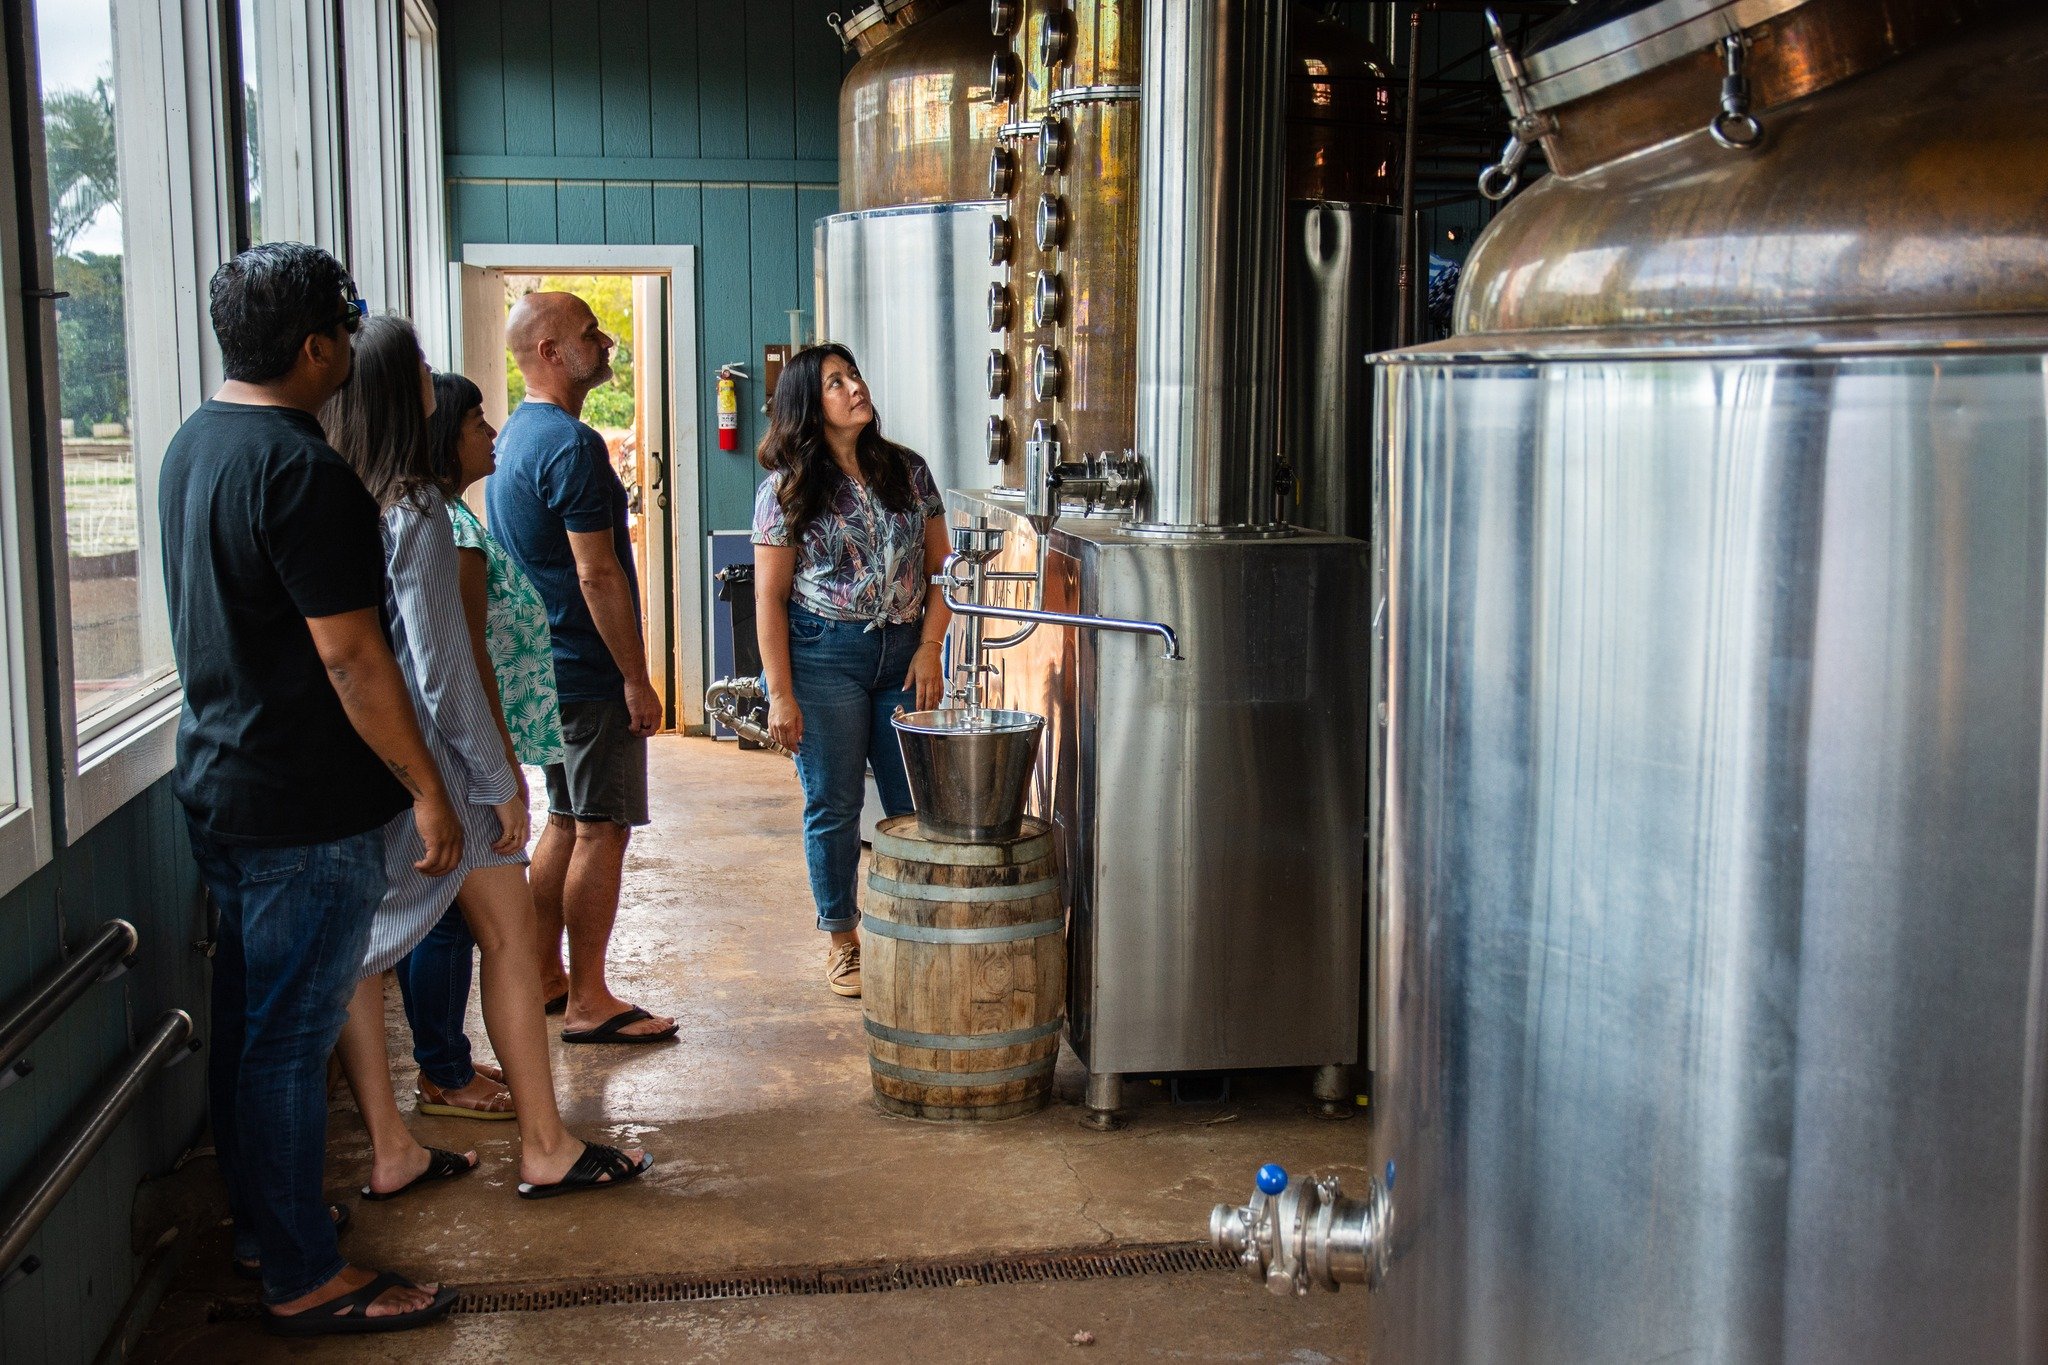 Let's join together! Explore the heart of Kō Hana Rum on our guided distillery tour in Kunia, where you'll journey through our sugarcane garden, barrel house, and distillery. Finish up at the tasting bar with one of our rum flights, comparing four un